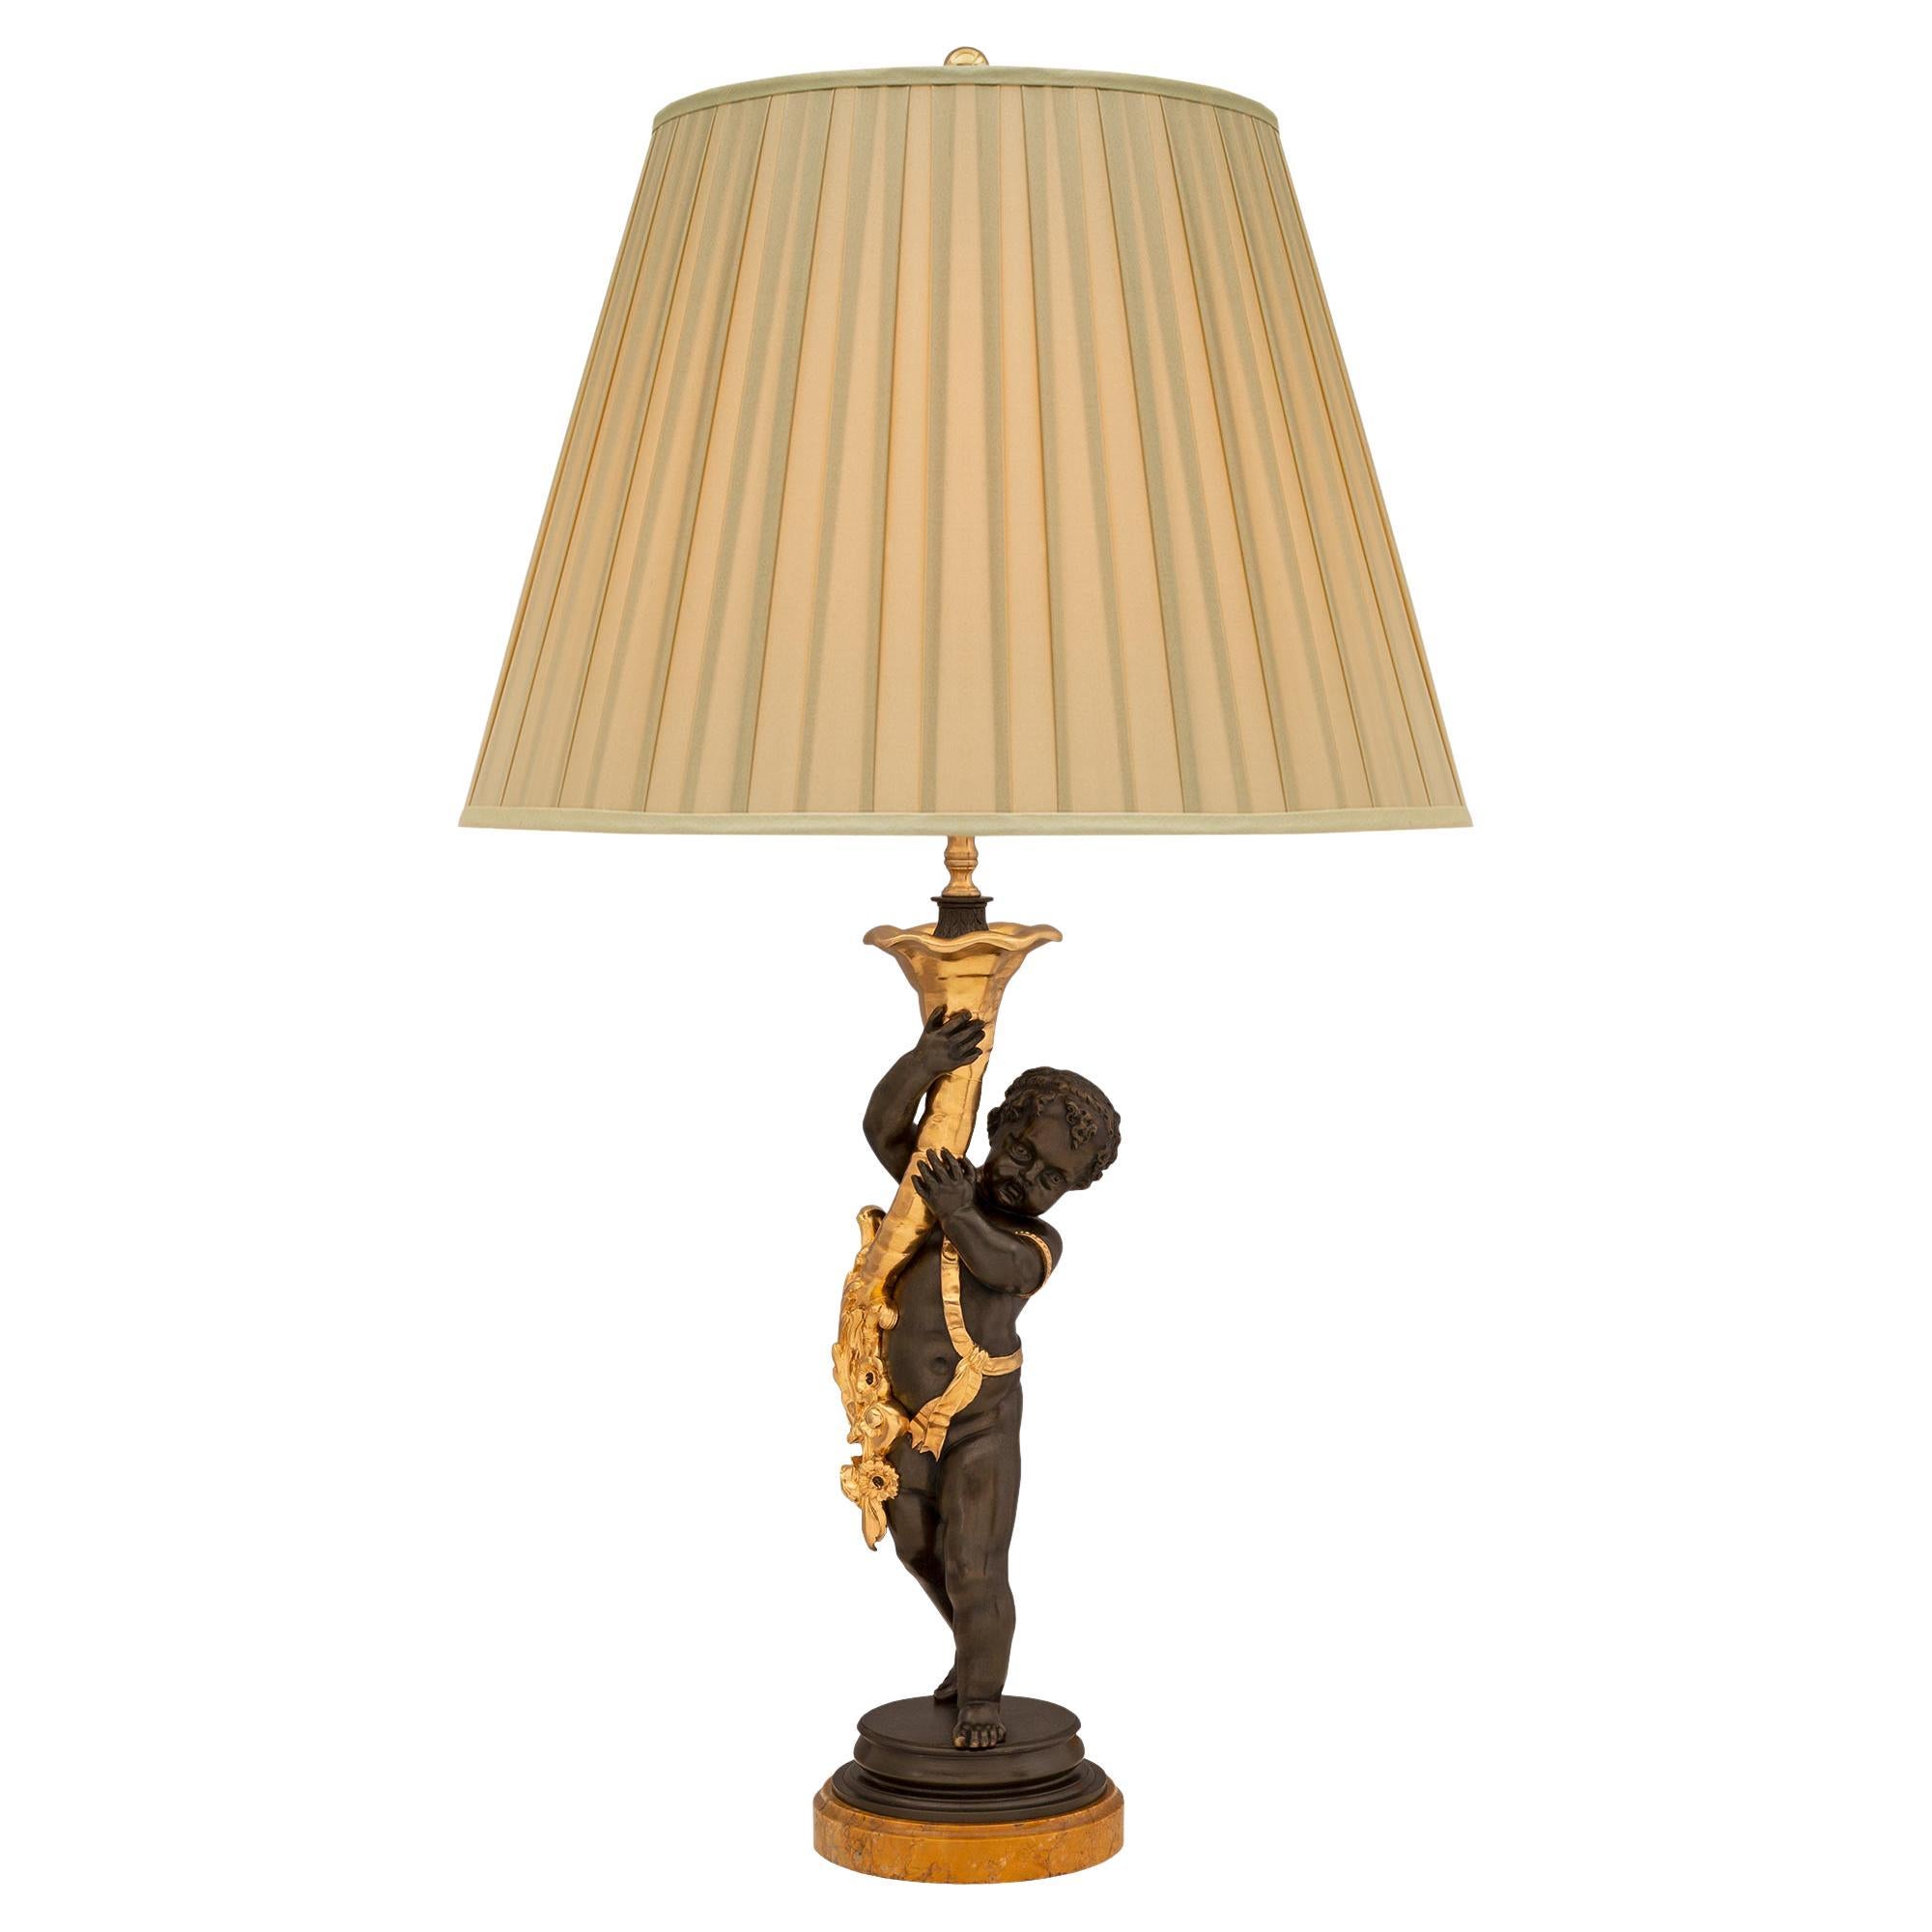 French 19th Century Louis XVI St. Bronze, Ormolu and Sienna Marble Lamp For Sale